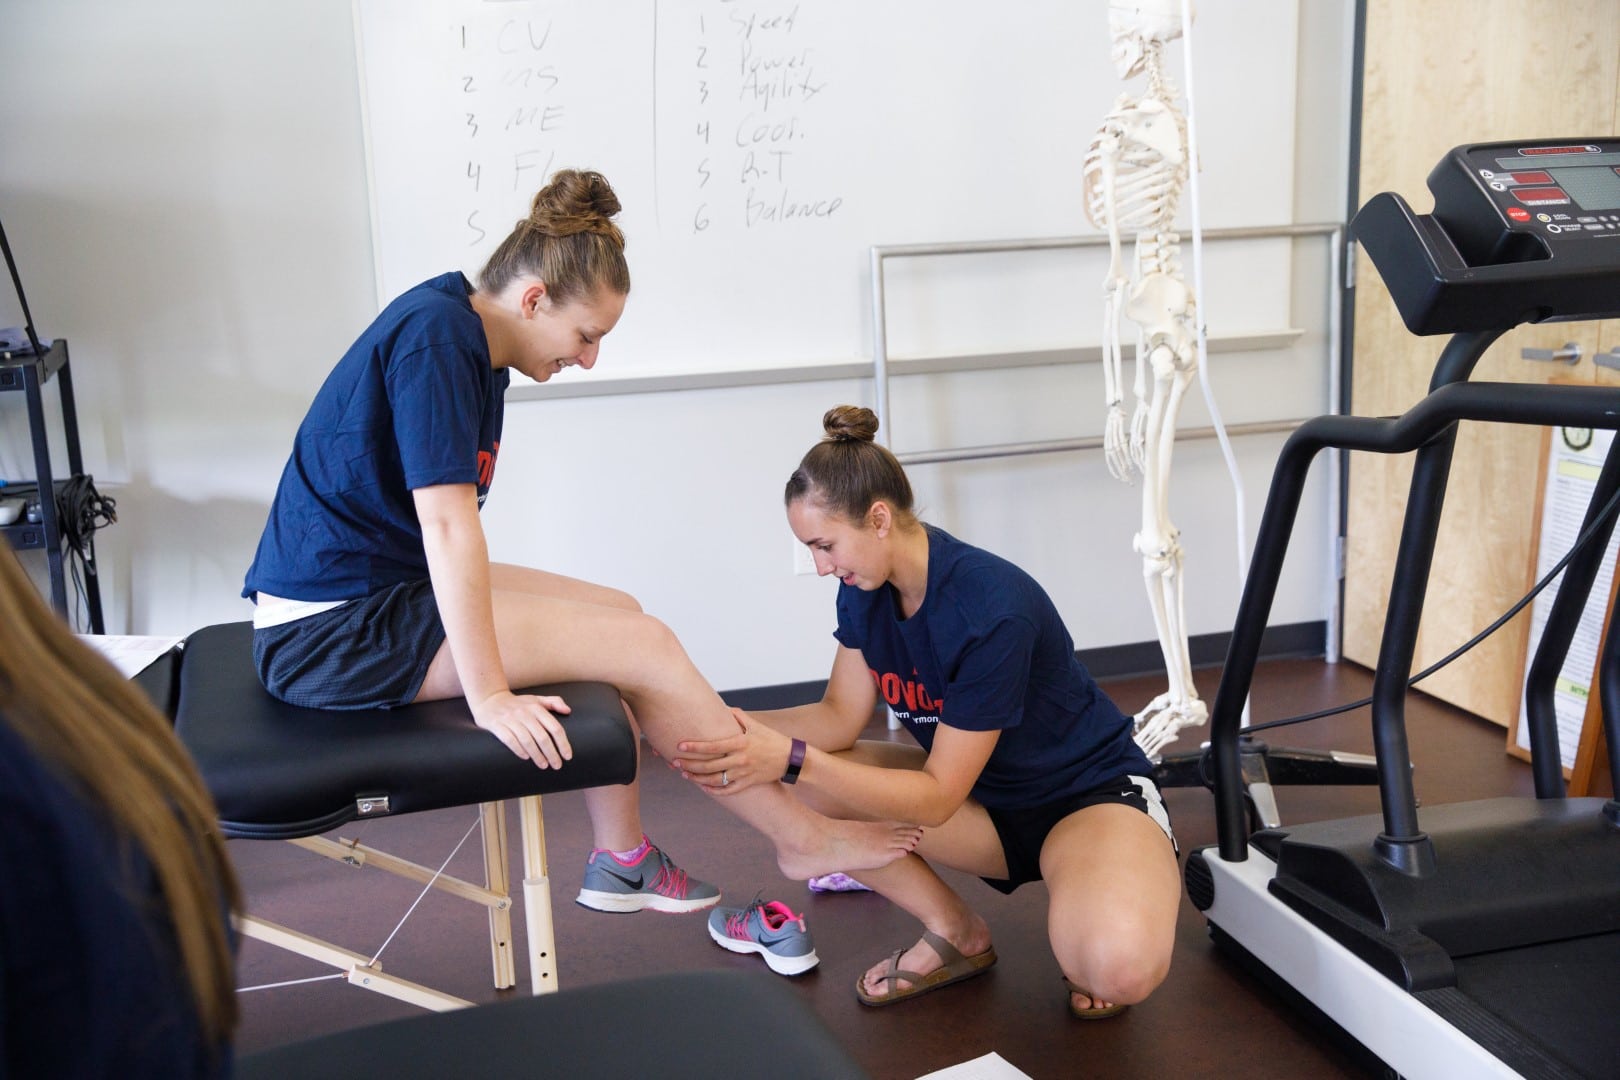 One girl examining the another's leg while studying physical therapy at Vermont State University.